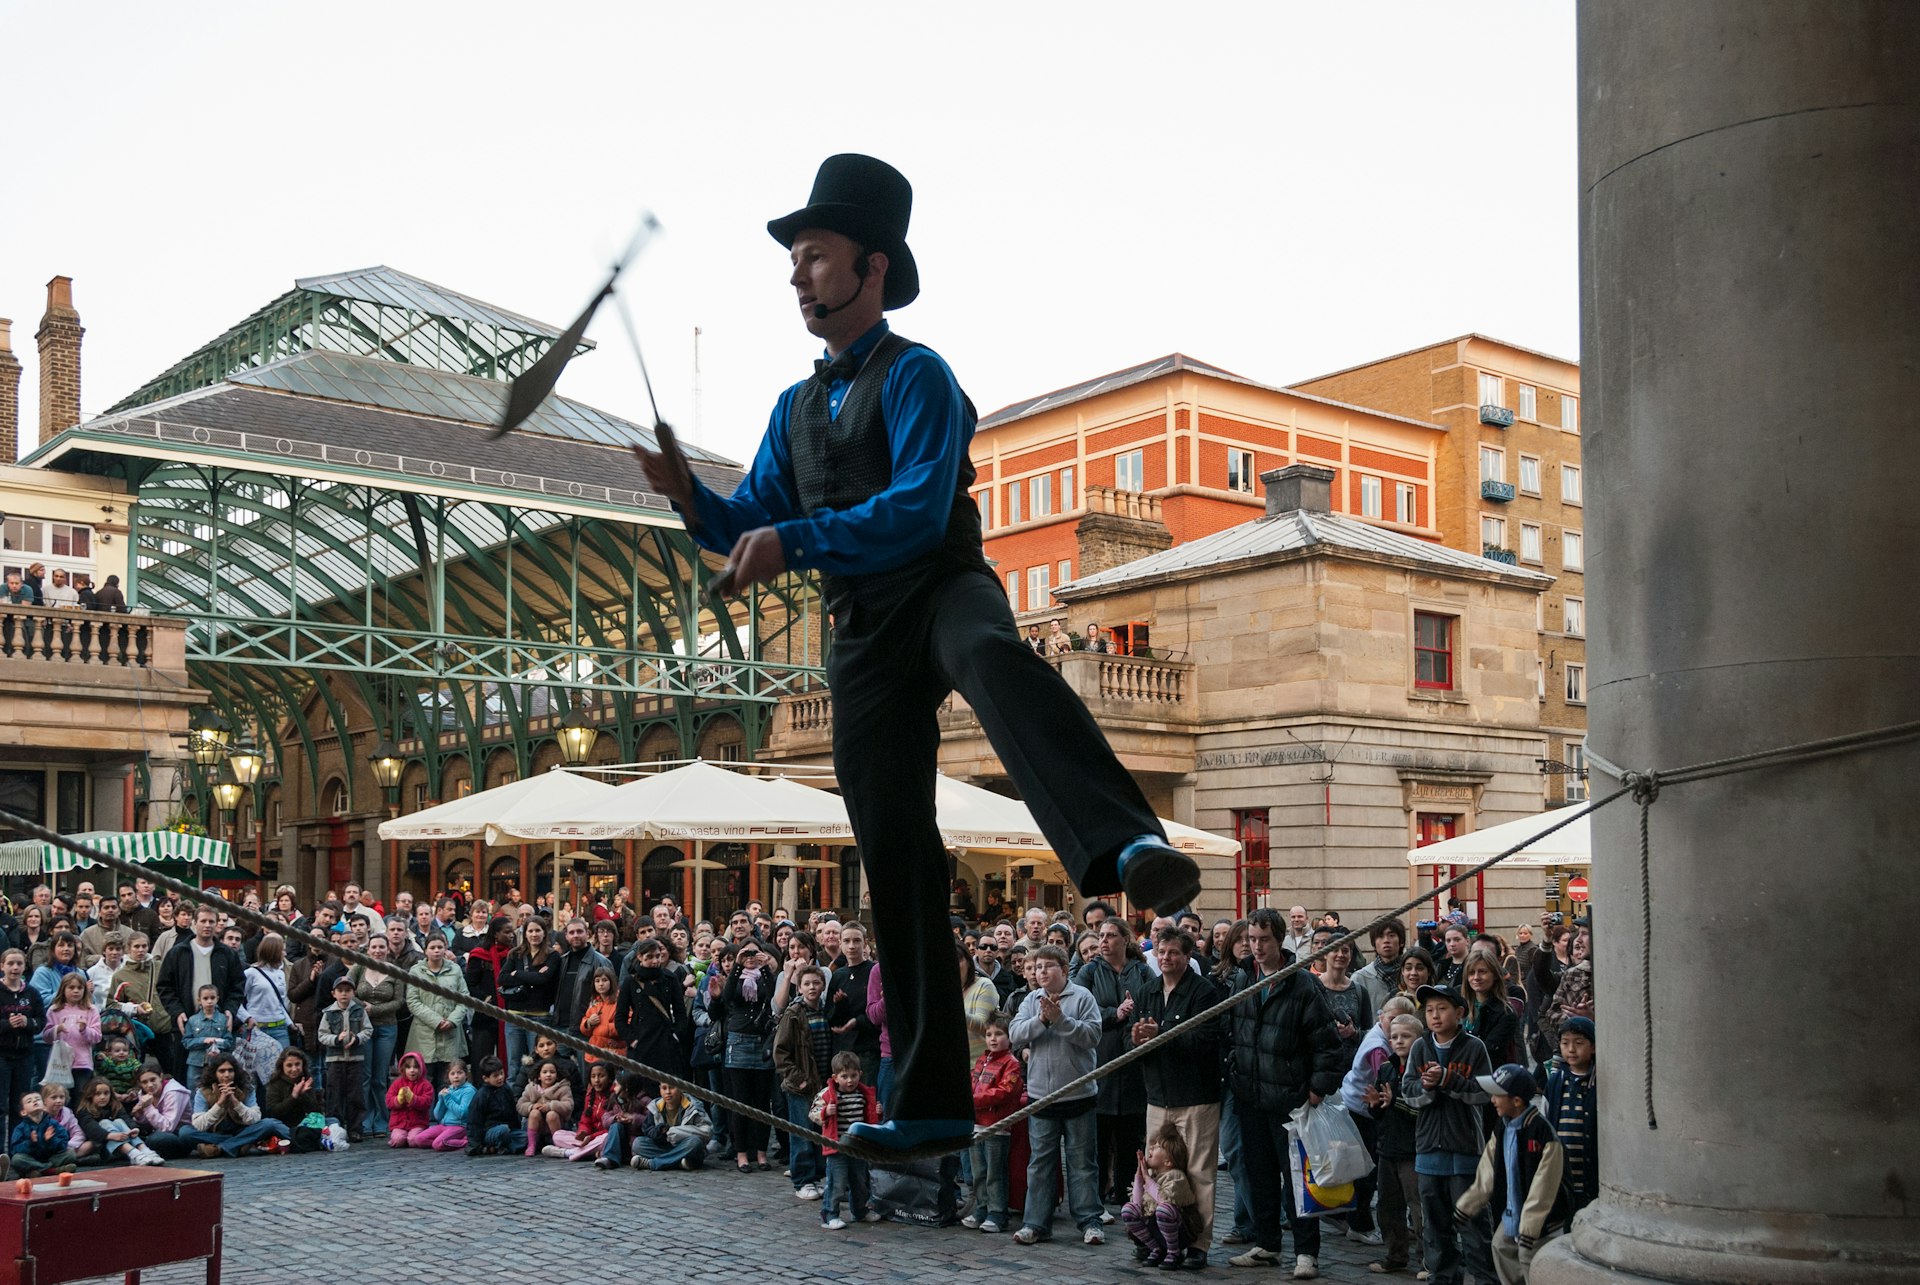 A street performer balances on a wire while juggling knives as a crowd looks on